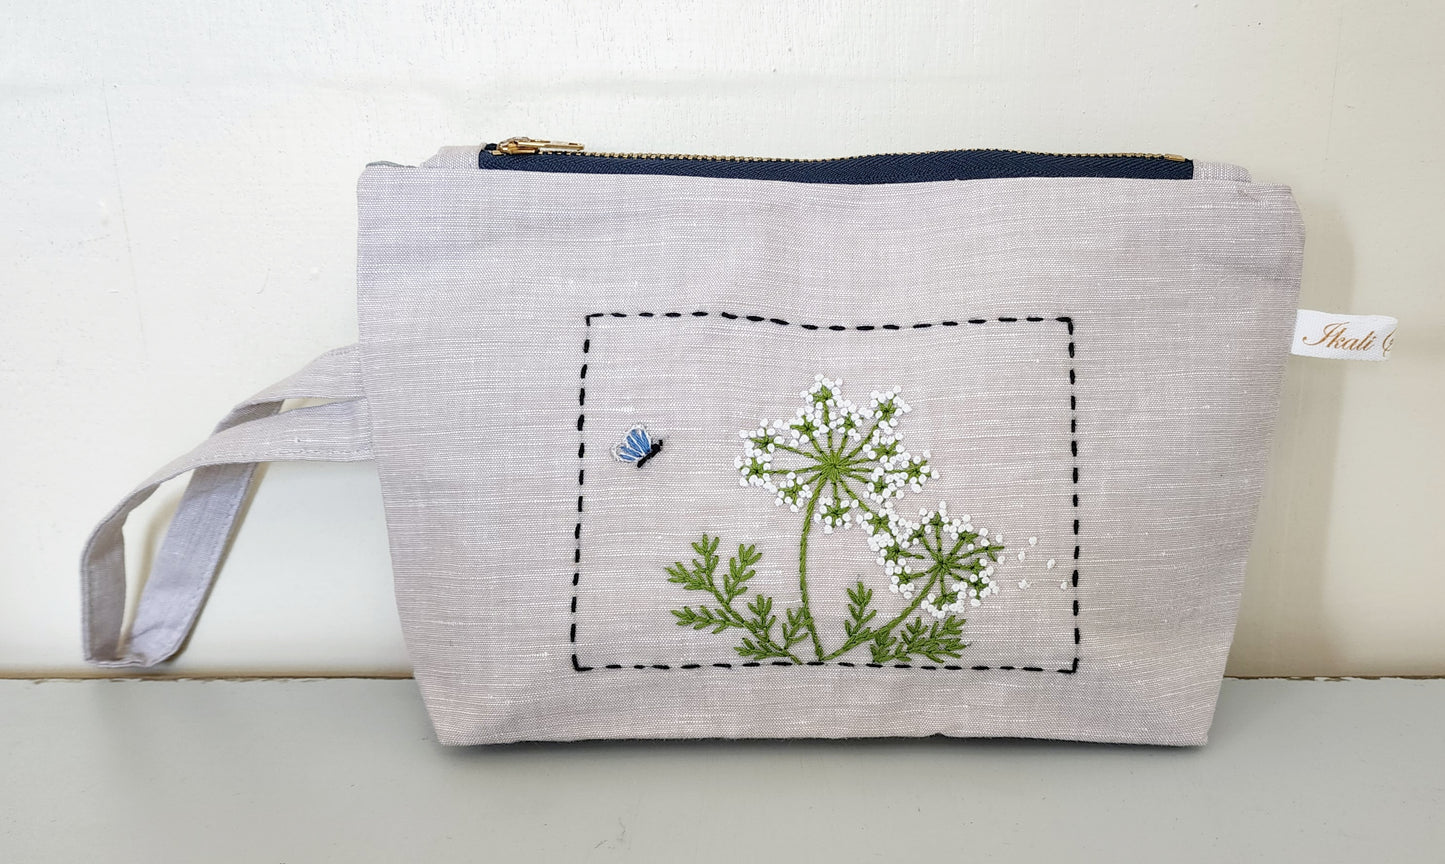 Ikali - Dandelion - Hand-embroidered Utility Pouch